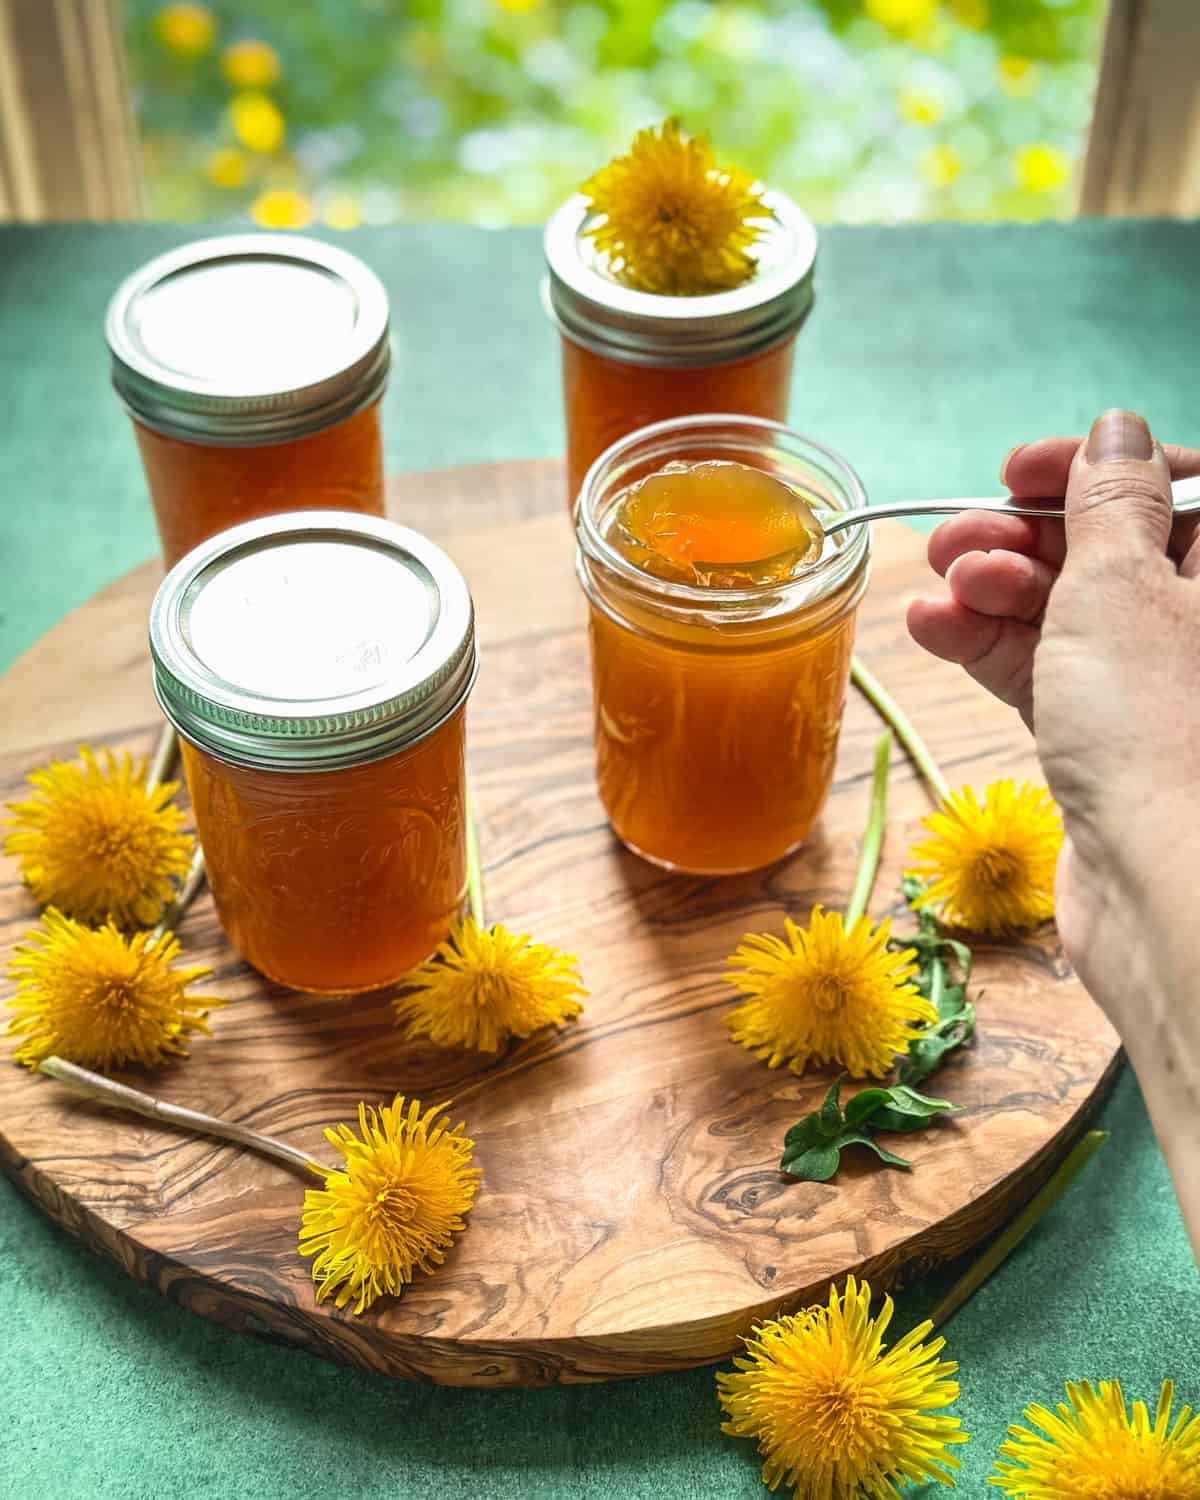 4 jars of dandelion honey on a wooden cutting board sitting on a green surface with a window in the background. One jar is opened and a spoon is lifting out some jelly, and fresh dandelion flowers are sprinkled. 